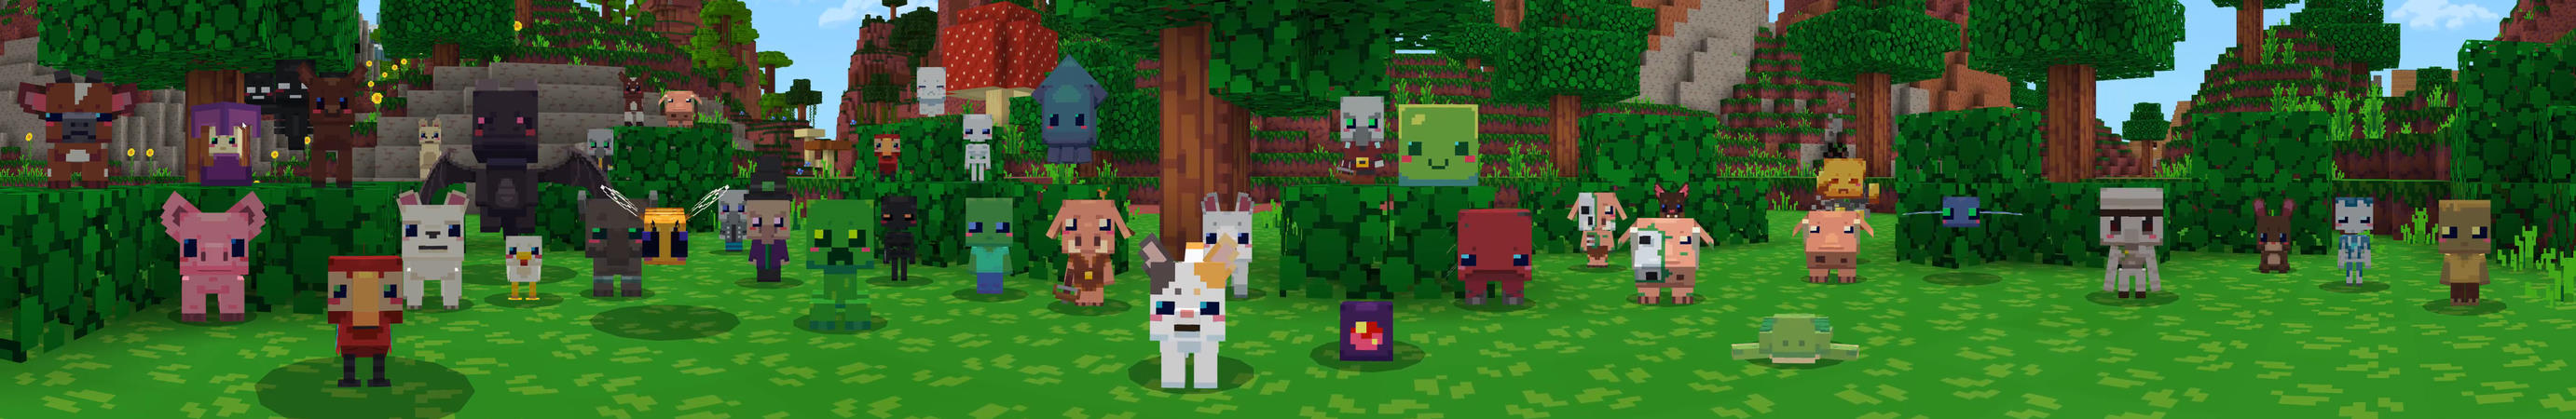 Mob Pets In Minecraft Marketplace Minecraft